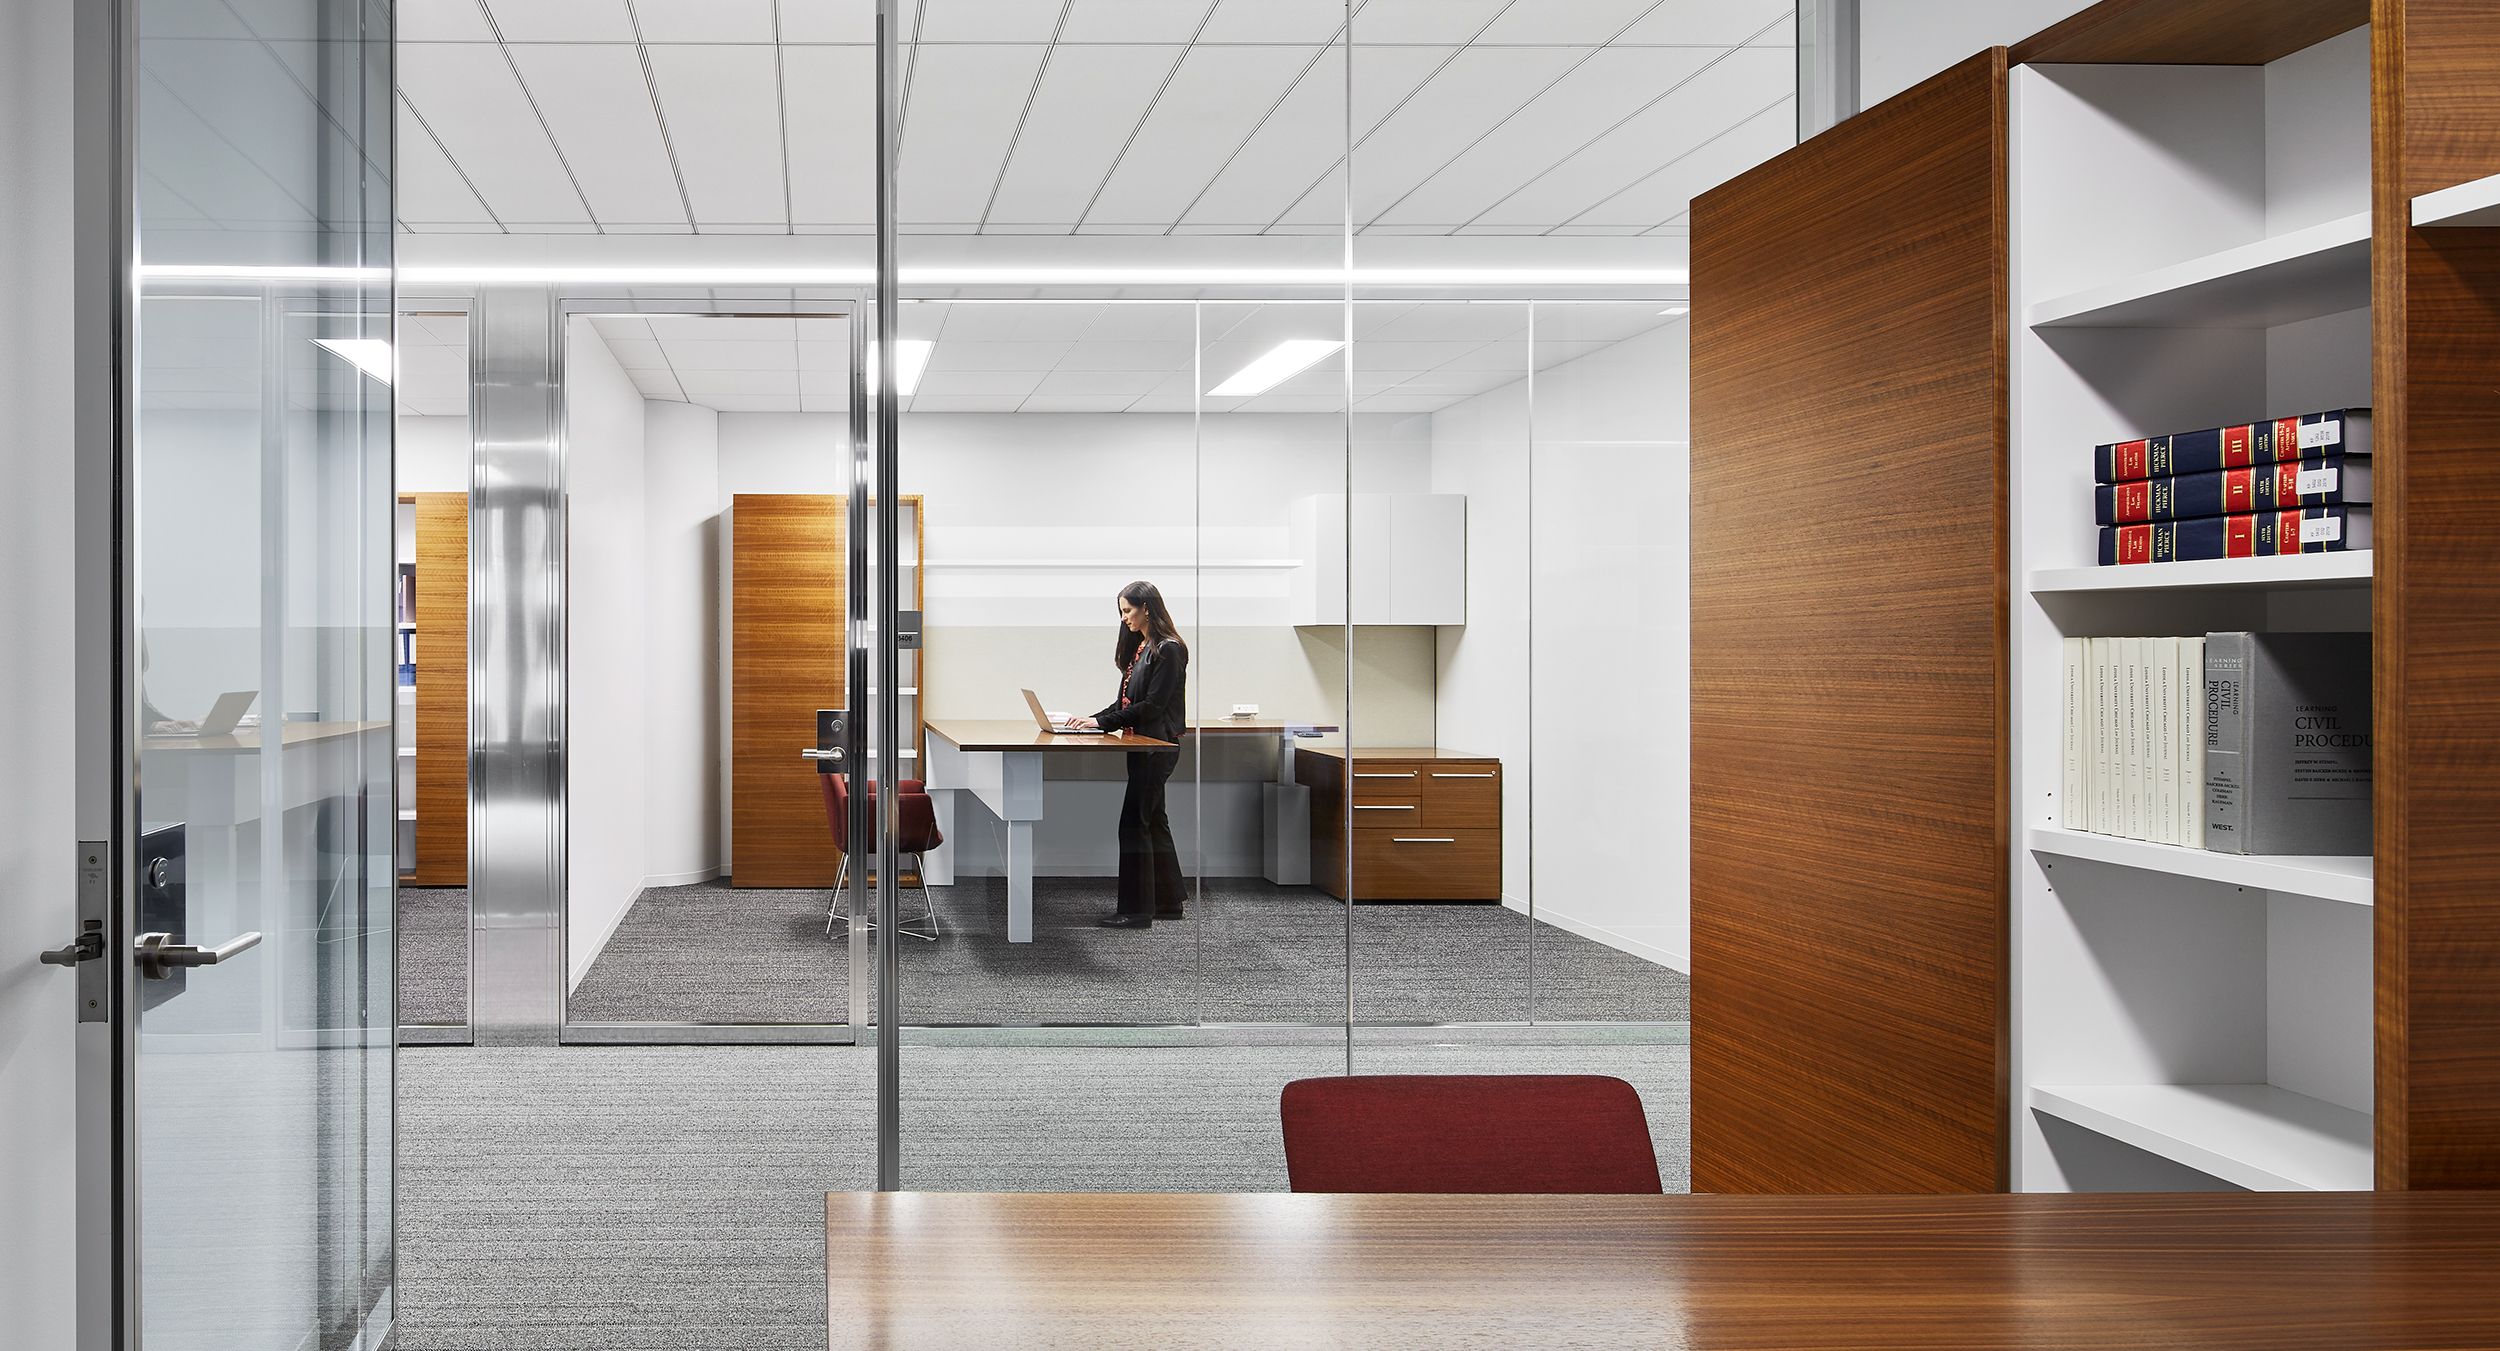 Adjustable-height desking is beautifully integrated into every office.